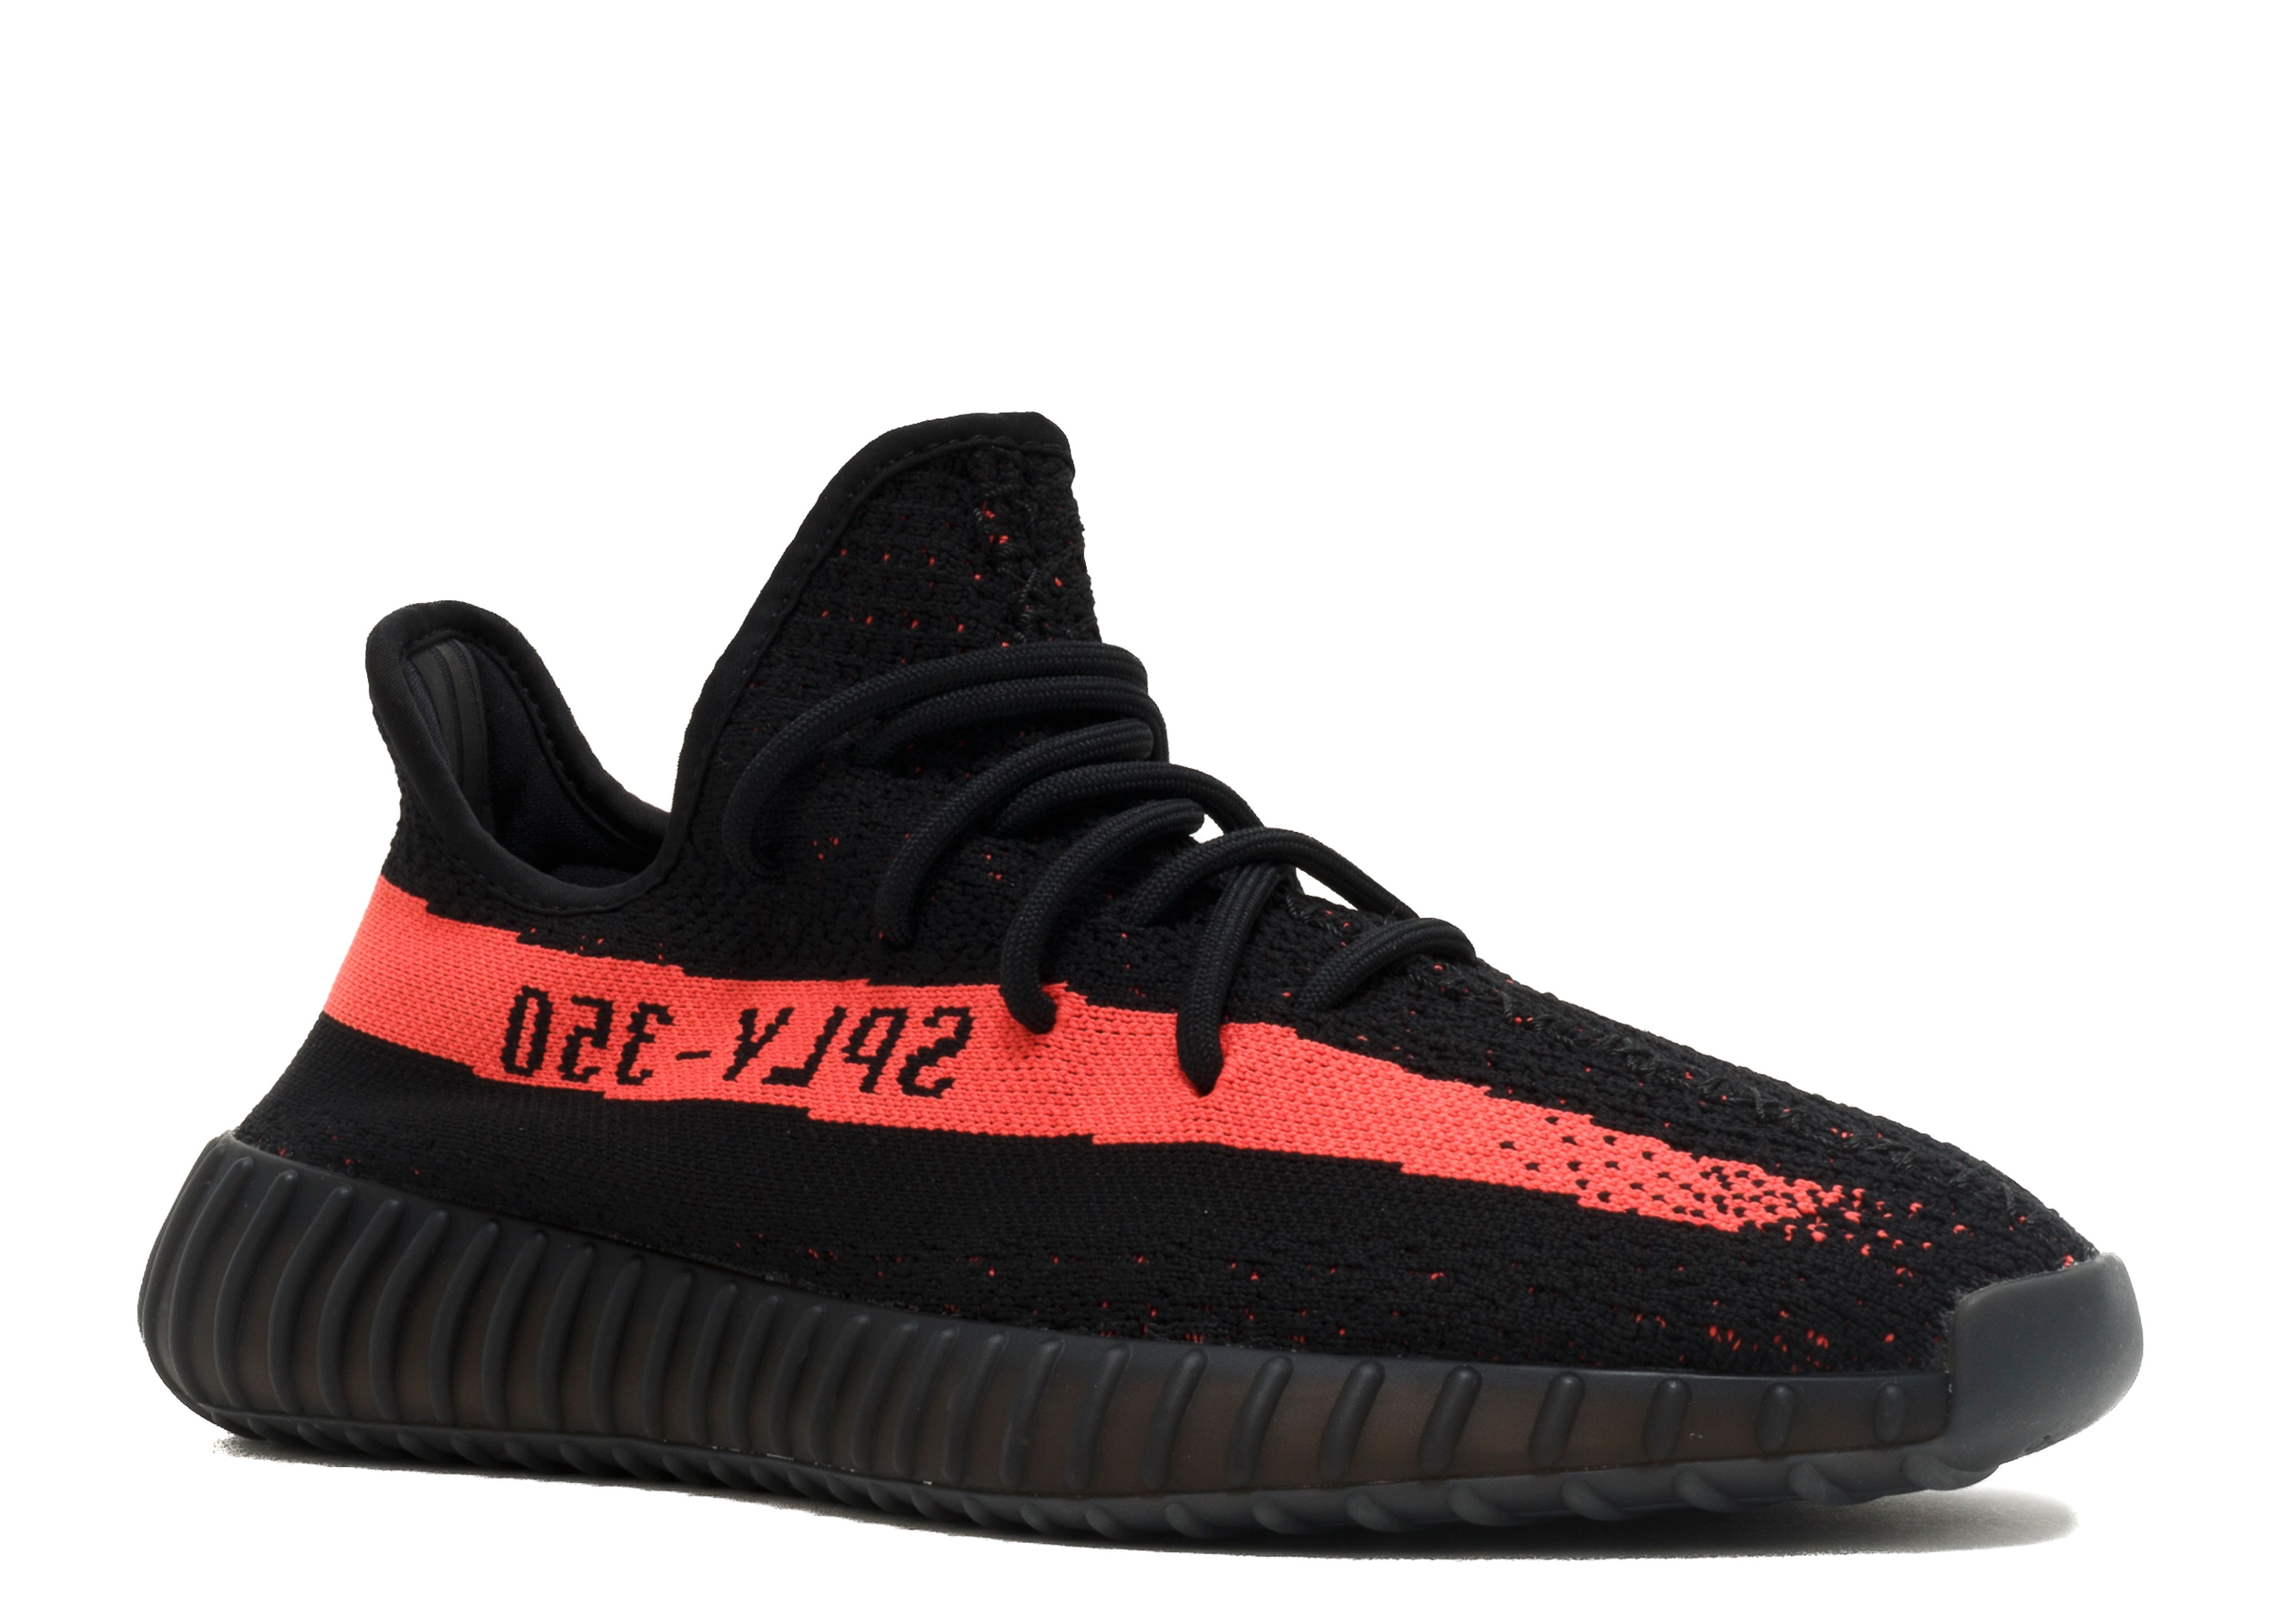 adidas Yeezy Boost 350 V2 Black Red By9612 Size 4 Ready to Ship 